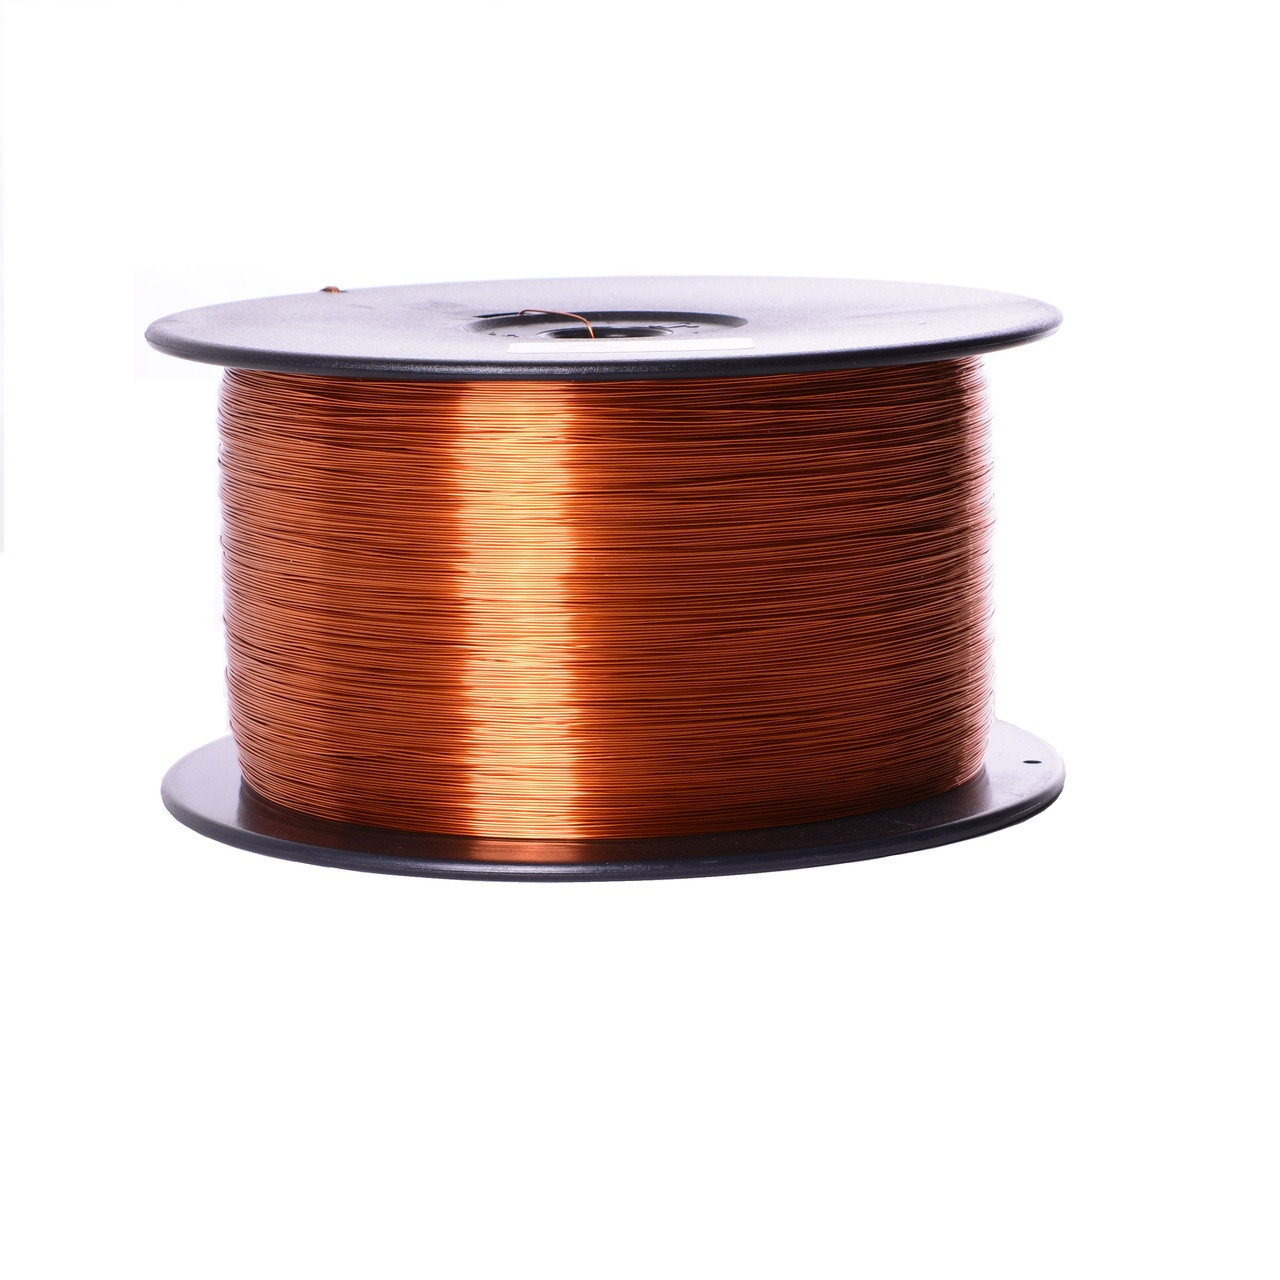 ENAMELLED COPPER WINDING WIRE MAGNET WIRE COIL WIRE 2.50mm 4KG Spool